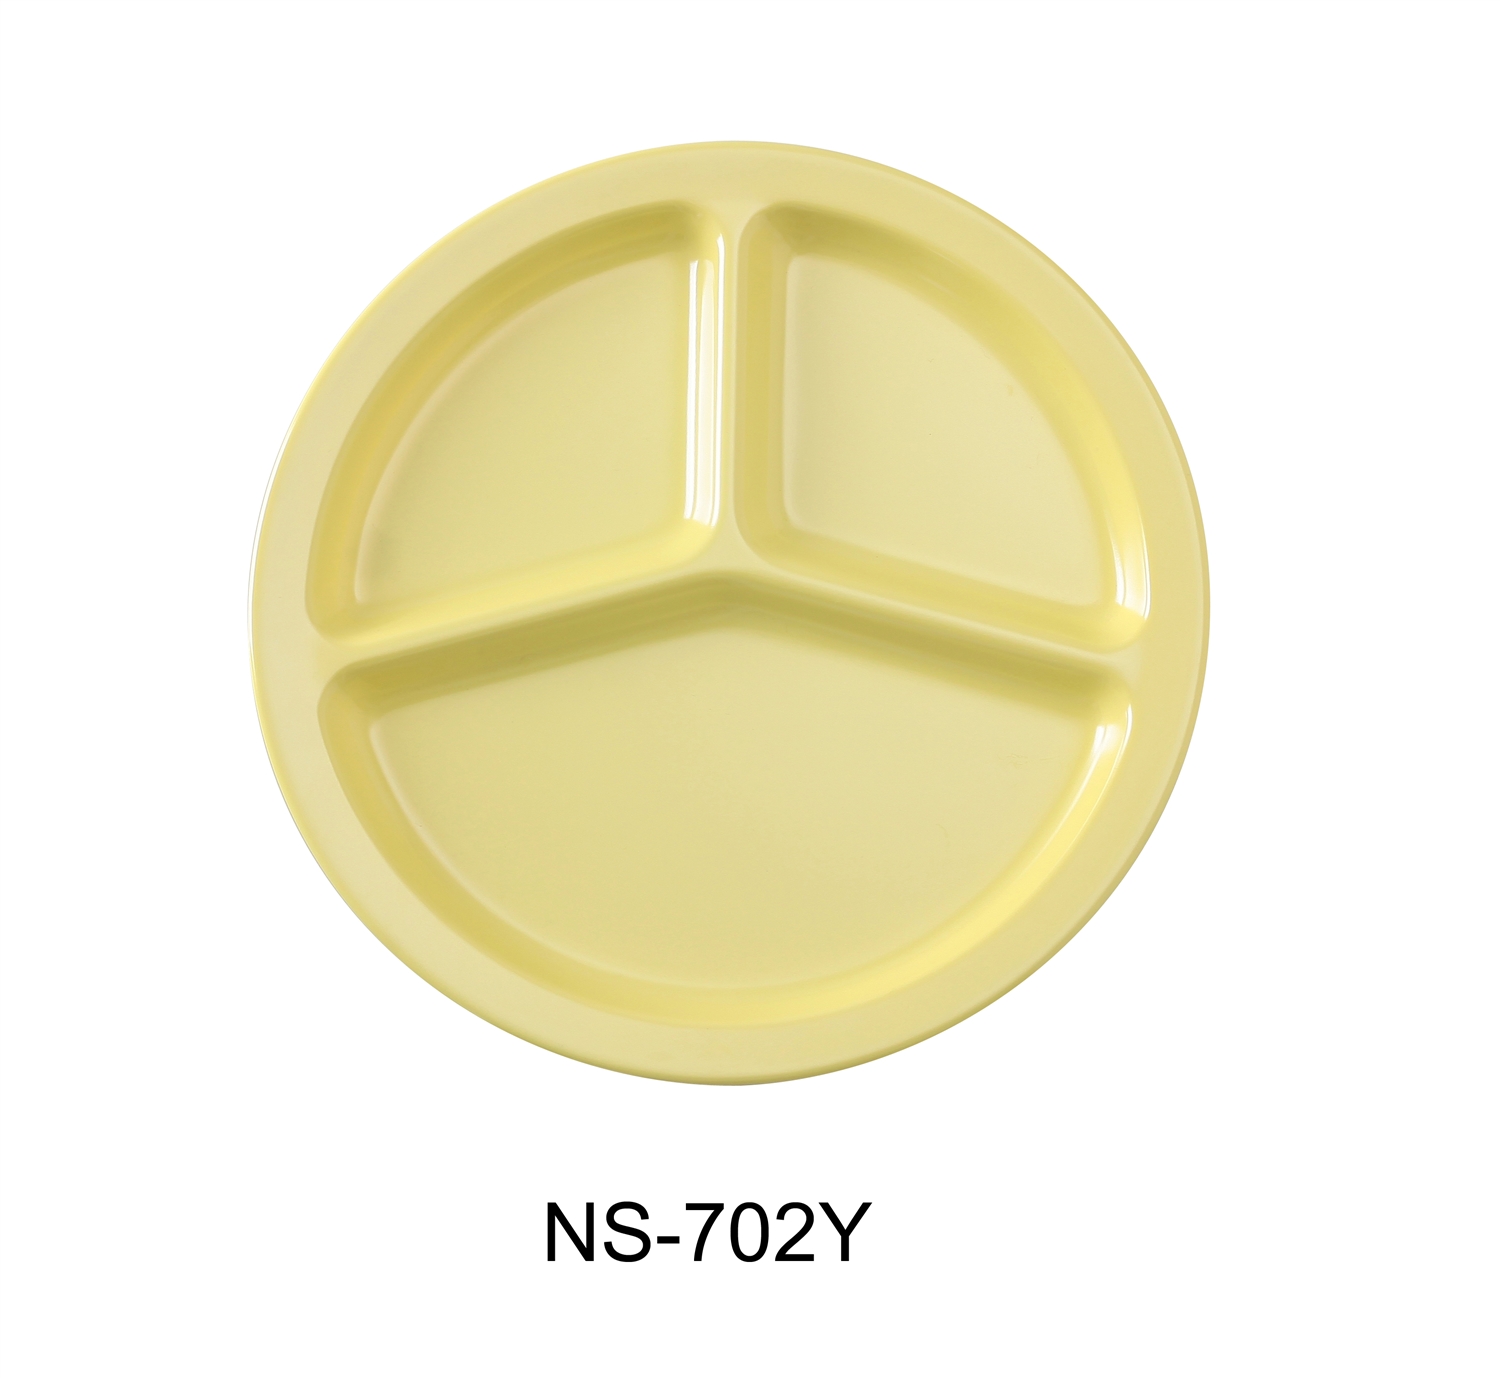 Yanco NS-702Y Nessico 3-Compartment Plate, Melamine, Yellow Color - by Celebrate Festival Inc